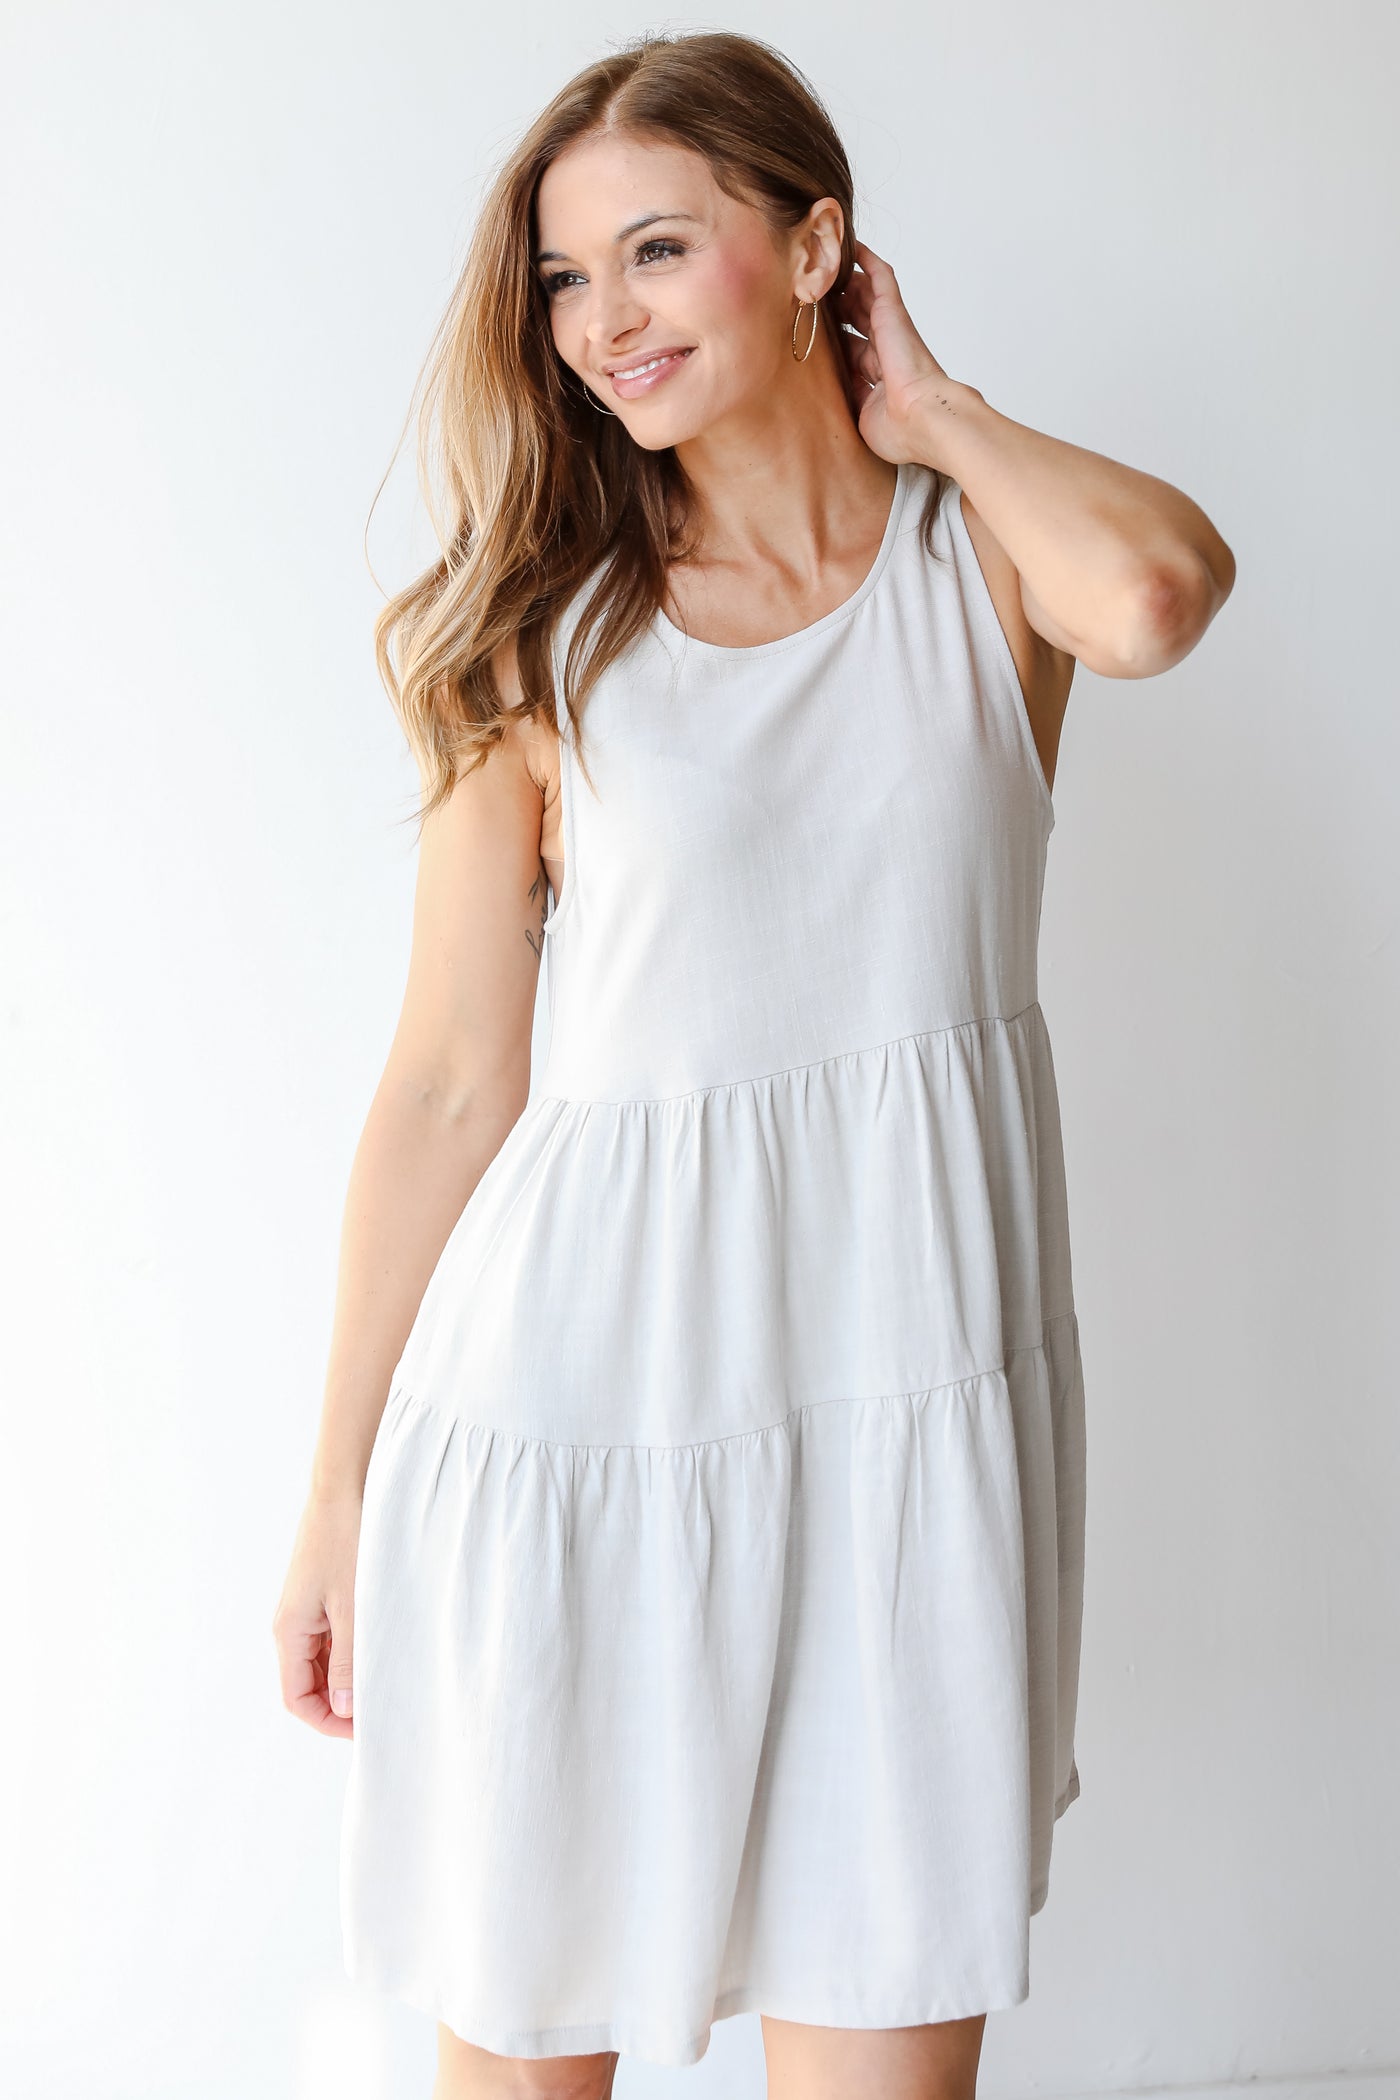 Linen Tiered Mini Dress in grey front view